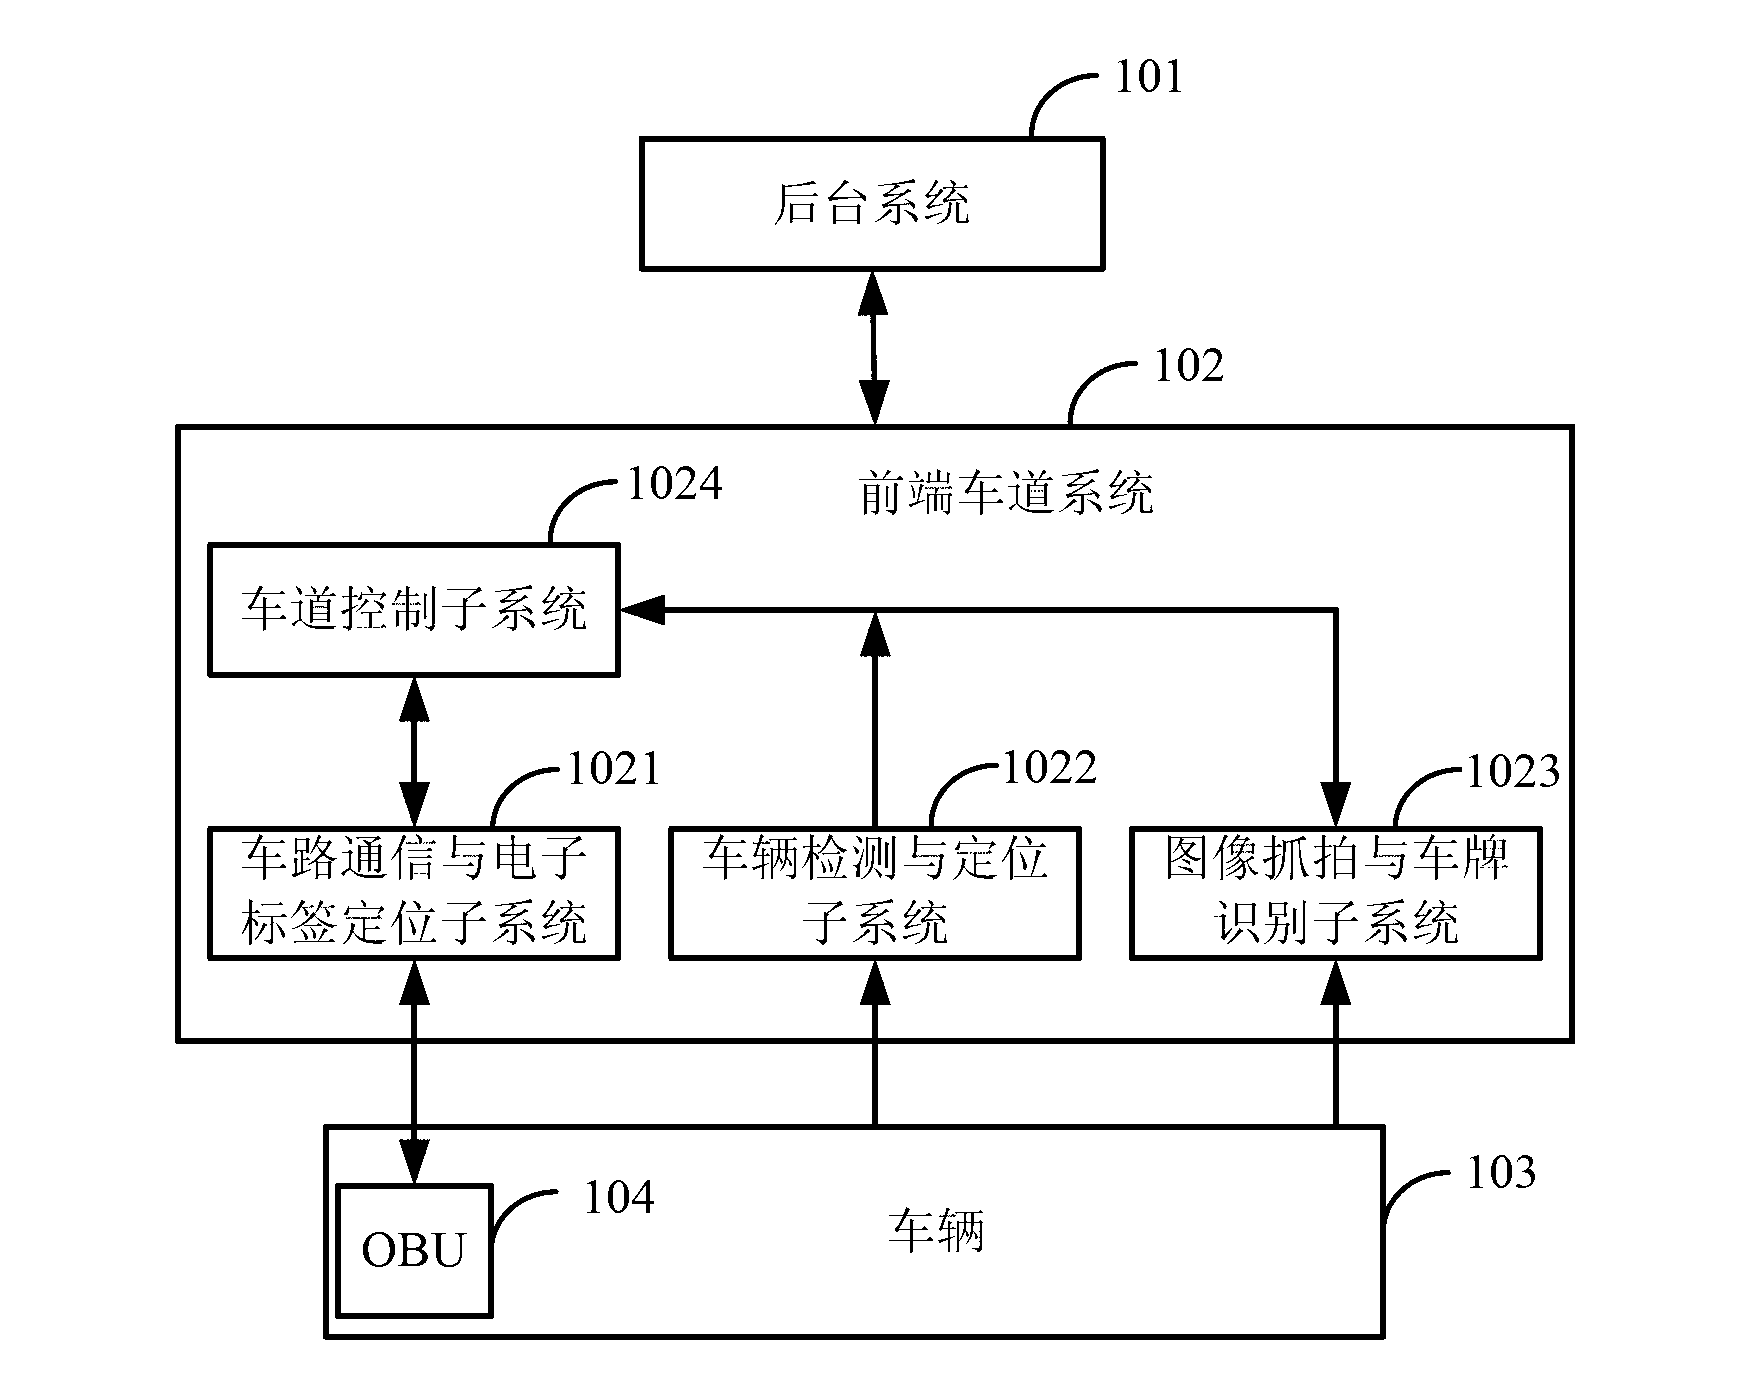 Multilane free-flow electronic toll collection system and method based on multi-beam antenna